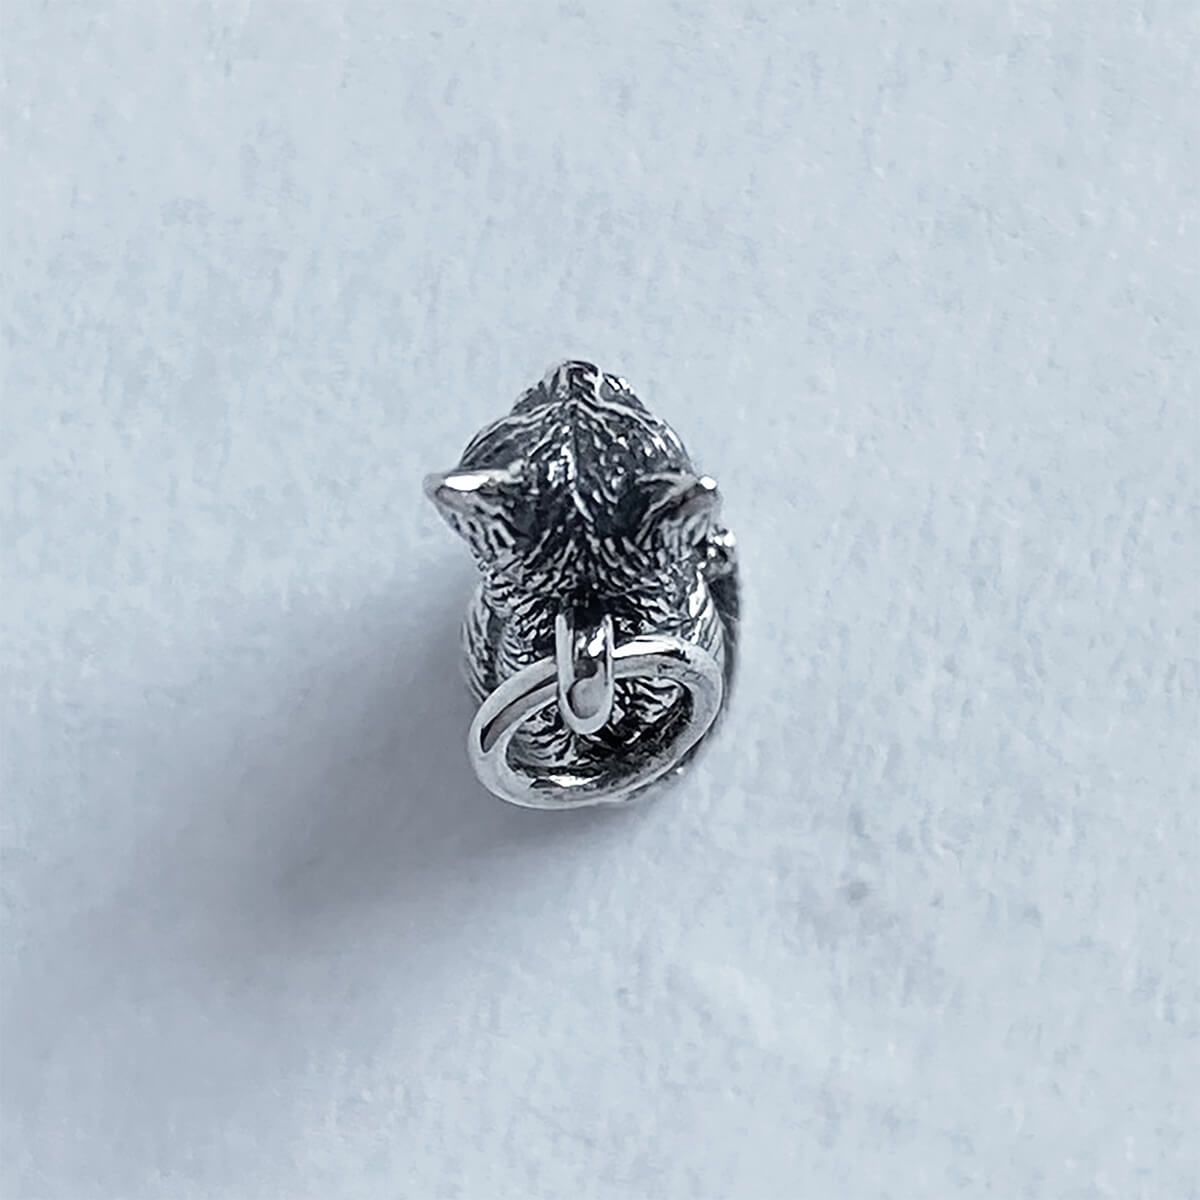 Lifelike sterling silver sitting cat charm from Charmarama charms